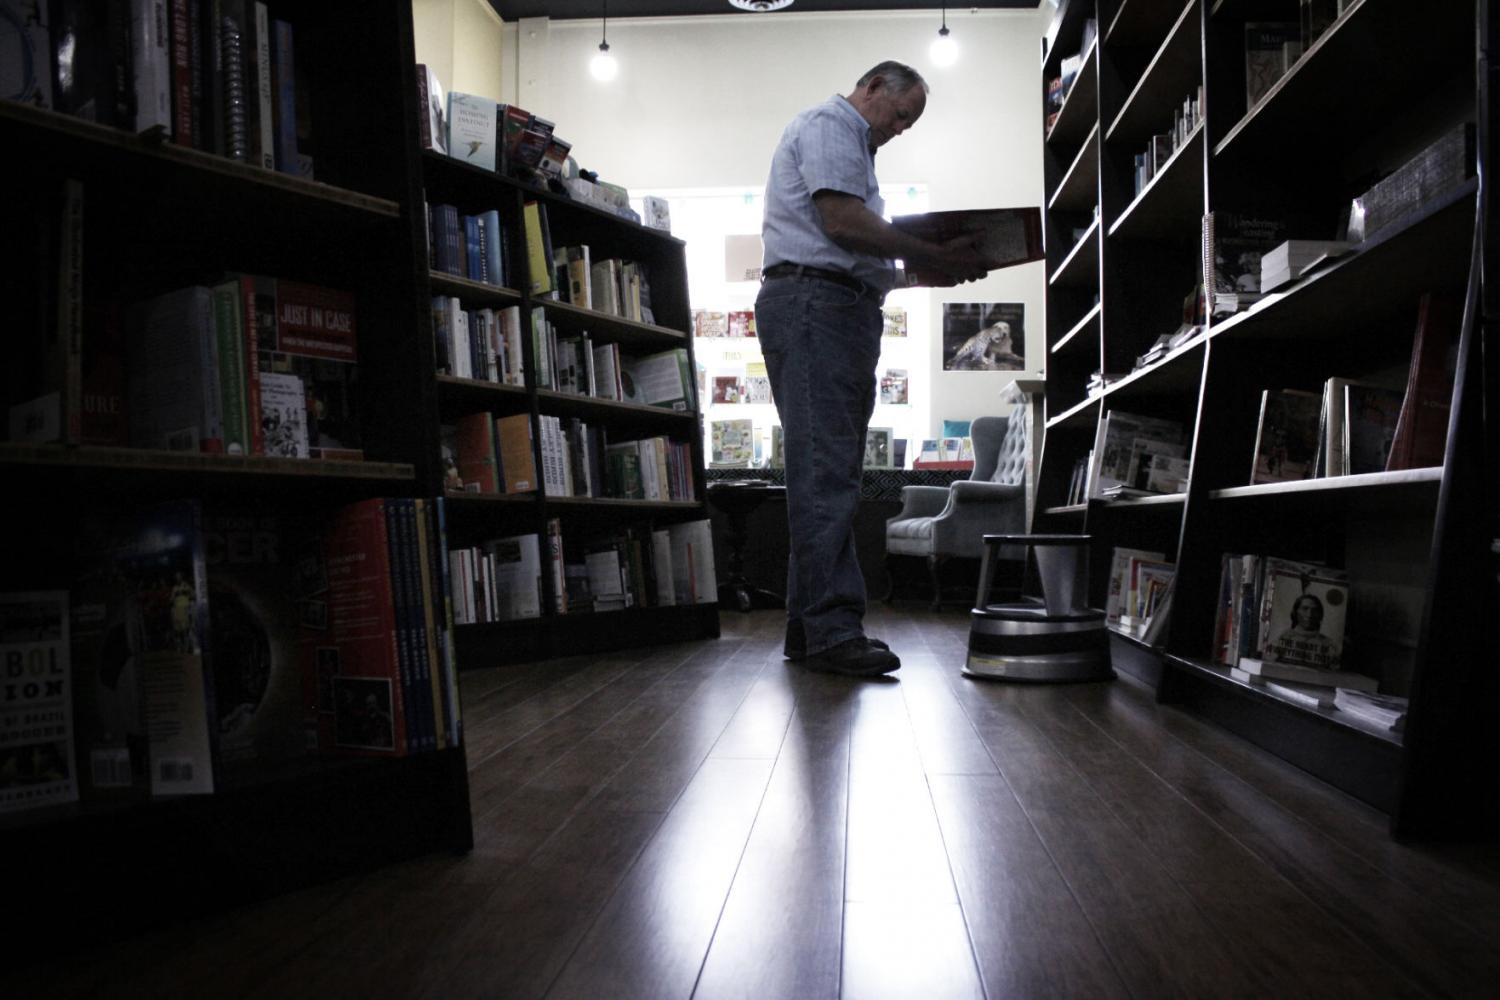 A shopper looks through books at the BookPeople of Moscow store on Sept. 16, 2014.